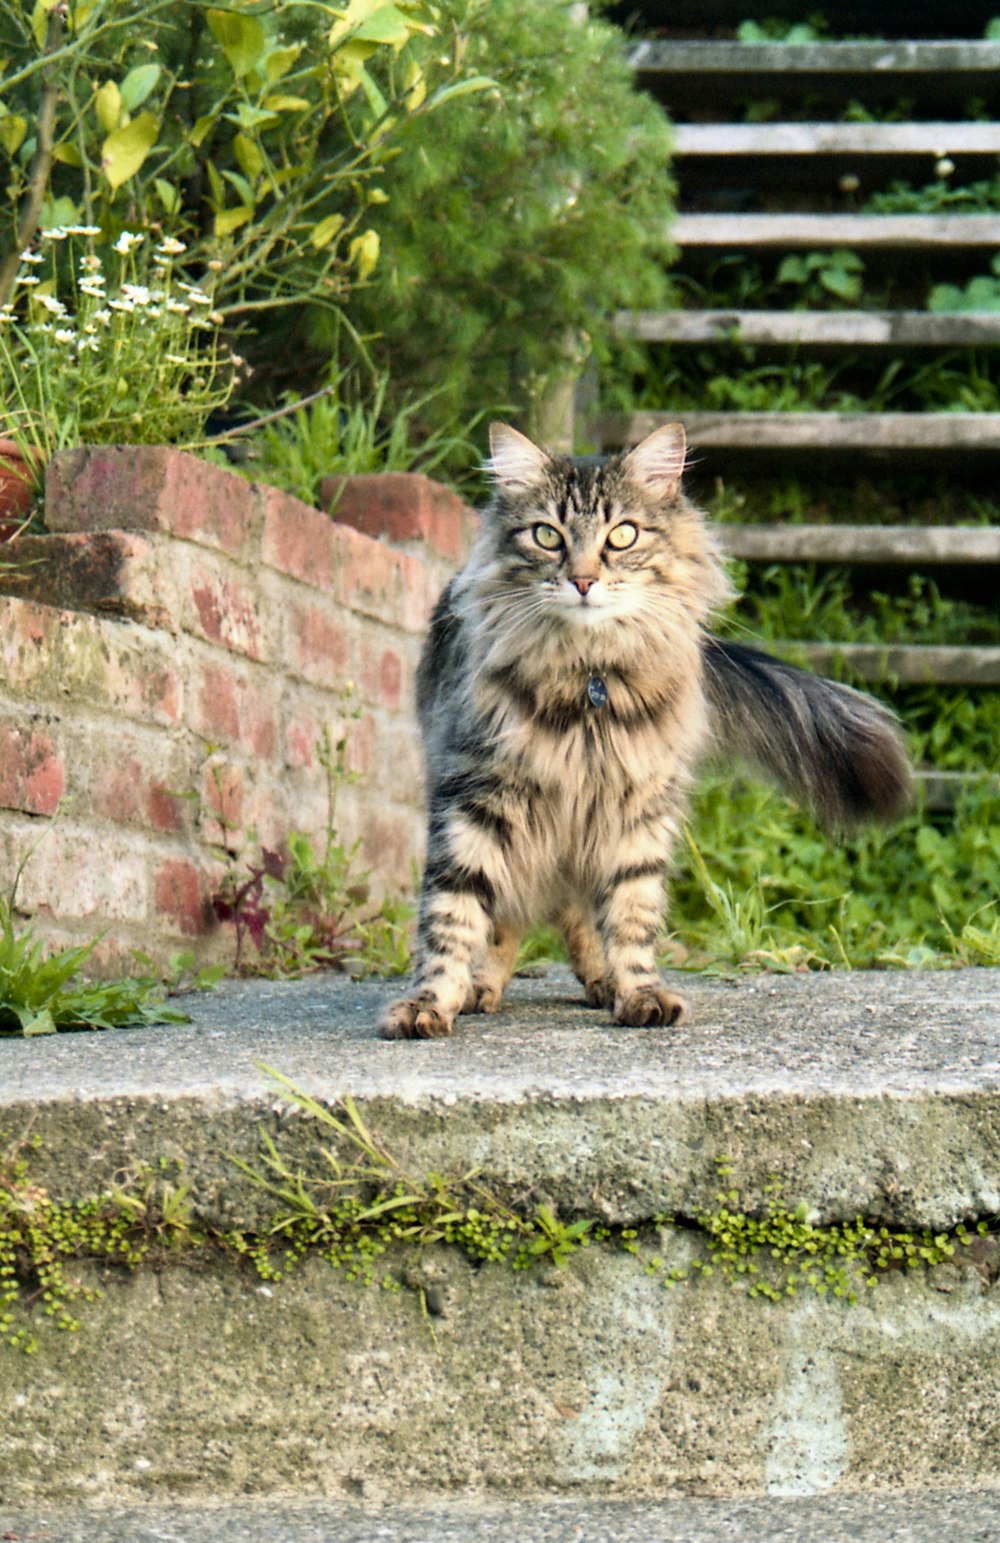 a long haired cat standing on top of a stone step